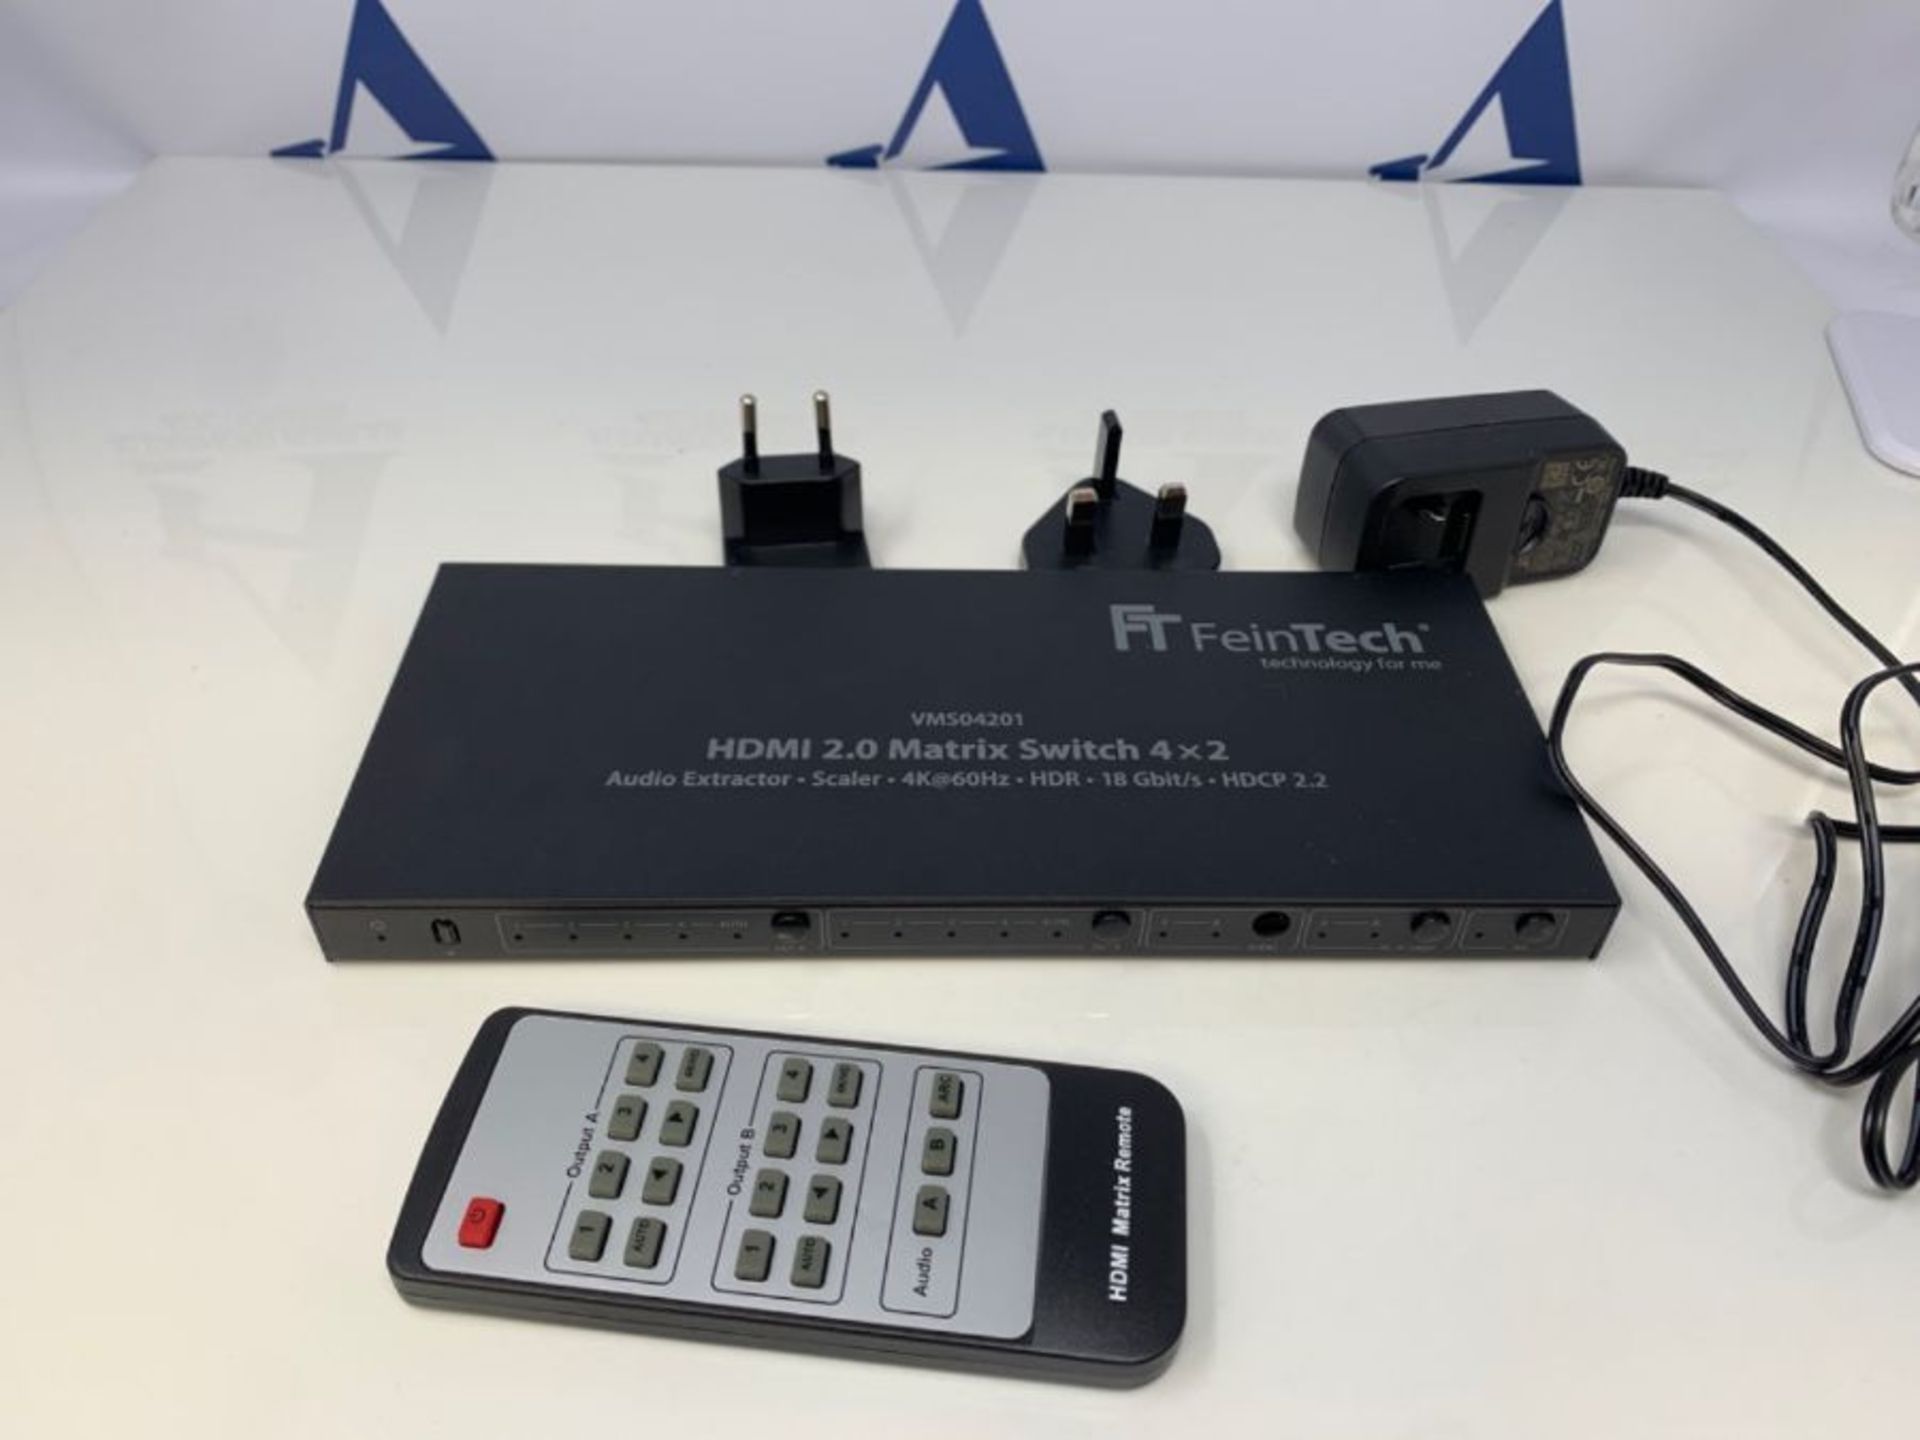 RRP £139.00 FeinTech VMS04201 HDMI Matrix Switch 4x2 with Audio Extractor Scaler Ultra HD 4K 60Hz - Image 3 of 3